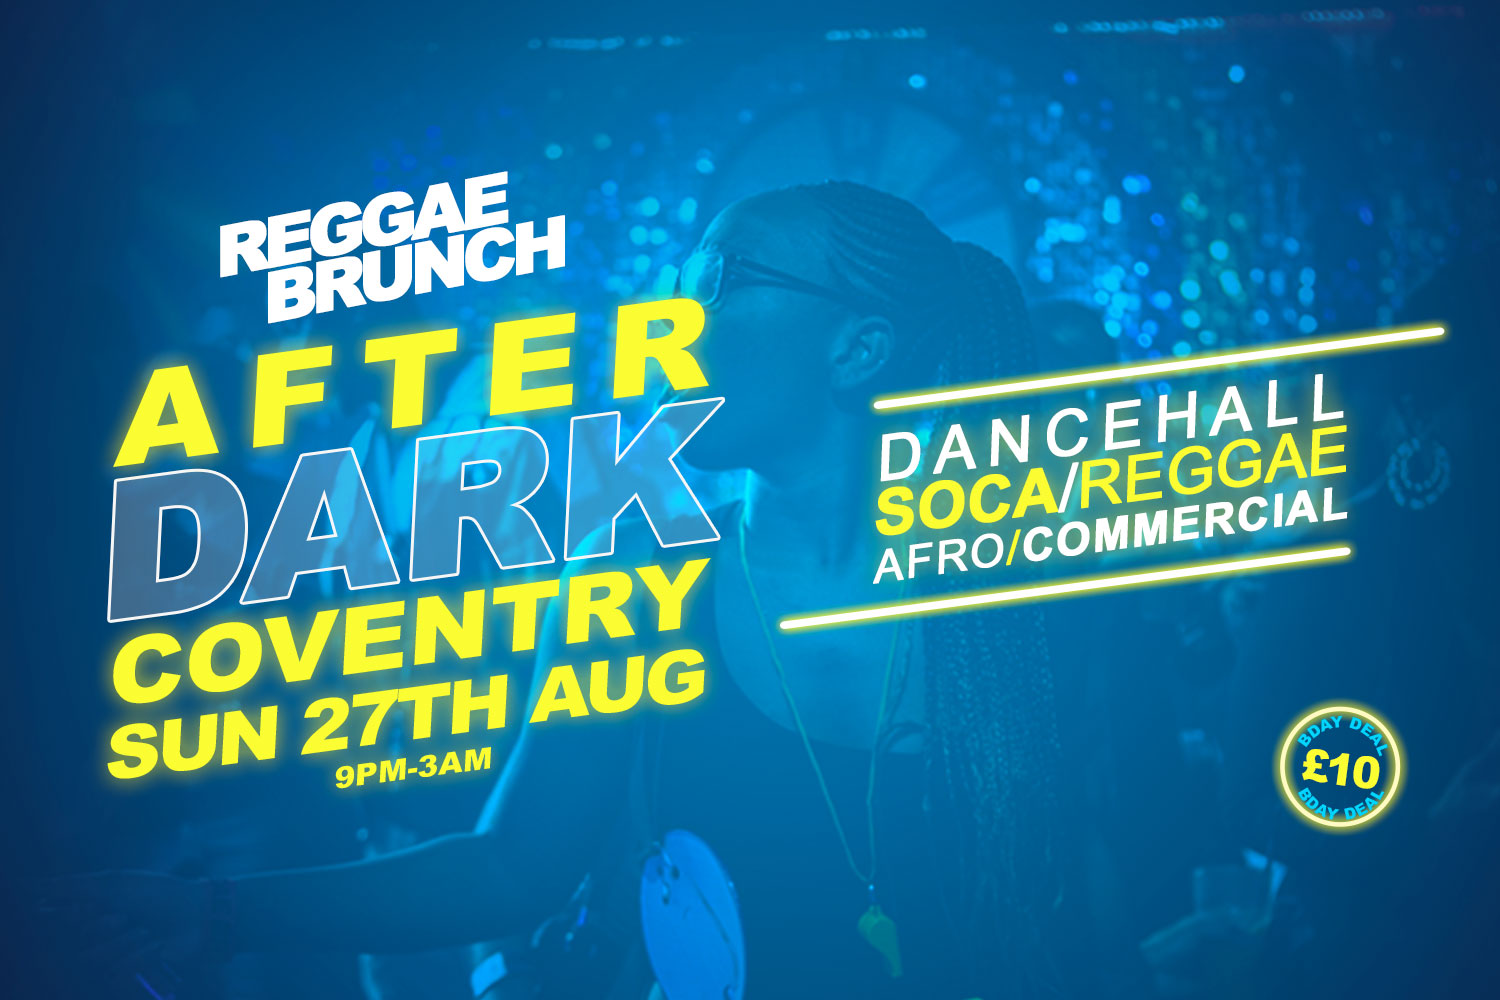 Sun, 27th Aug | Coventry AfterDark